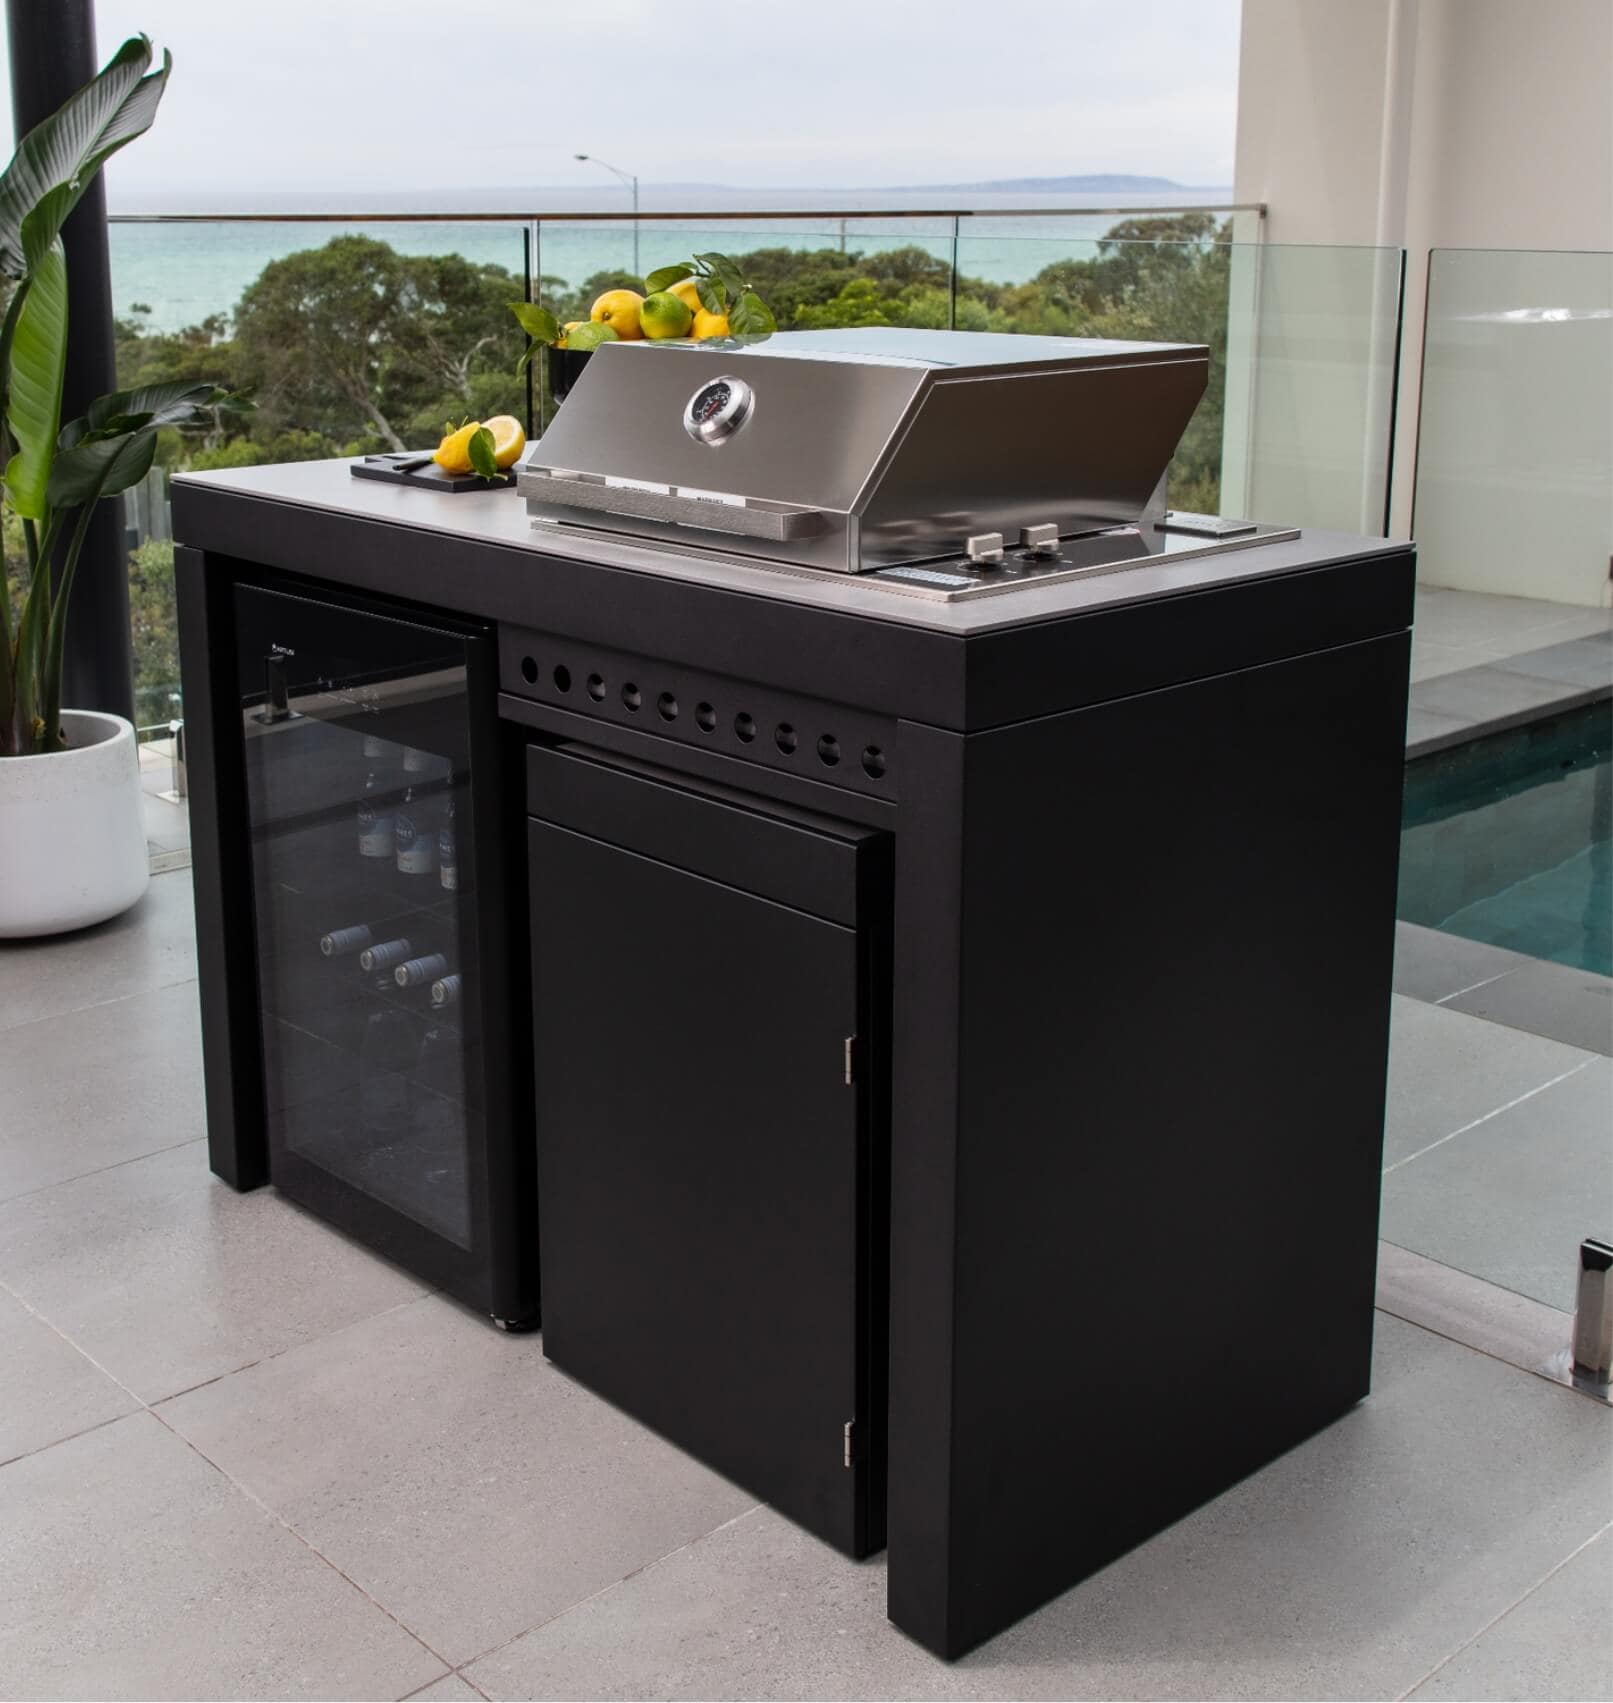 1400mm wide outdoor kitchen available at quadro concepts